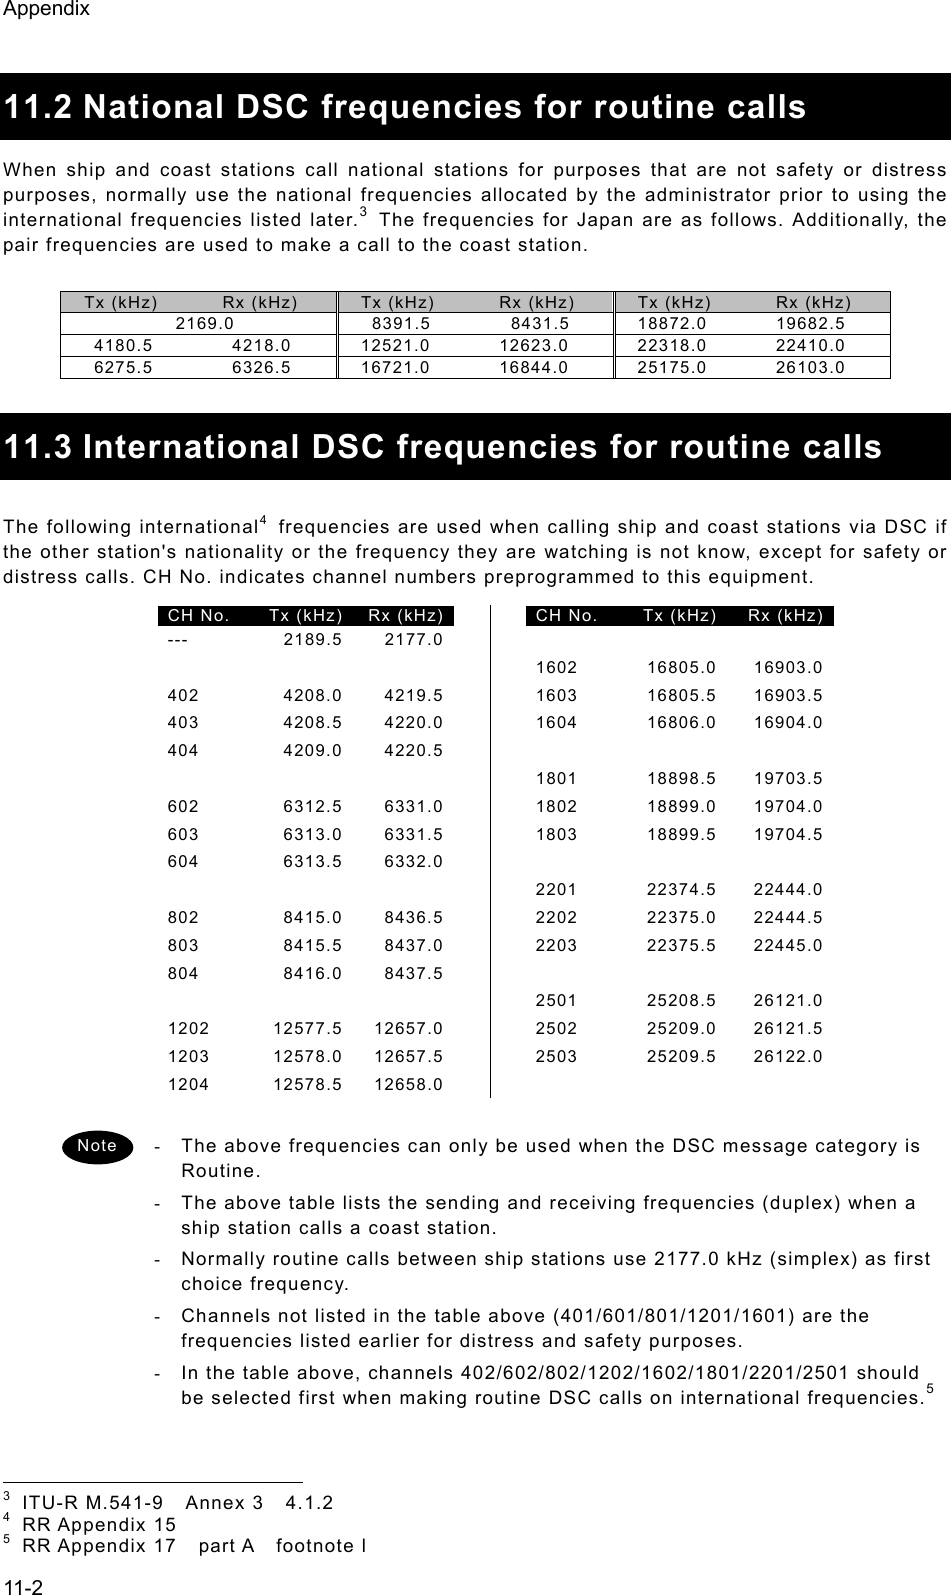 Appendix  11-2  11.2 National DSC frequencies for routine calls When ship and coast stations call national stations for purposes that are not safety or distress purposes, normally use the national frequencies allocated by the administrator prior to using the international frequencies listed later.3  The frequencies for Japan are as follows. Additionally, the pair frequencies are used to make a call to the coast station.  Tx (kHz)  Rx (kHz)  Tx (kHz)  Rx (kHz)  Tx (kHz)  Rx (kHz) 2169.0 8391.5 8431.5 18872.0 19682.5 4180.5  4218.0 12521.0 12623.0 22318.0 22410.0 6275.5  6326.5 16721.0 16844.0 25175.0 26103.0  11.3 International DSC frequencies for routine calls  The following international4  frequencies are used when calling ship and coast stations via DSC if the other station&apos;s nationality or the frequency they are watching is not know, except for safety or distress calls. CH No. indicates channel numbers preprogrammed to this equipment.   CH No.  Tx (kHz)  Rx (kHz)    CH No.  Tx (kHz)  Rx (kHz)   --- 2189.5 2177.0       1602 16805.0 16903.0 402 4208.0 4219.5 1603 16805.5 16903.5 403 4208.5 4220.0 1604 16806.0 16904.0 404 4209.0 4220.5       1801 18898.5 19703.5 602 6312.5 6331.0 1802 18899.0 19704.0 603 6313.0 6331.5 1803 18899.5 19704.5 604 6313.5 6332.0       2201 22374.5 22444.0 802 8415.0 8436.5 2202 22375.0 22444.5 803 8415.5 8437.0 2203 22375.5 22445.0 804 8416.0 8437.5       2501 25208.5 26121.0 1202 12577.5 12657.0 2502  25209.0 26121.5 1203 12578.0 12657.5 2503  25209.5 26122.0 1204 12578.5 12658.0     -  The above frequencies can only be used when the DSC message category is Routine.  -  The above table lists the sending and receiving frequencies (duplex) when a ship station calls a coast station.   -  Normally routine calls between ship stations use 2177.0 kHz (simplex) as first choice frequency. -  Channels not listed in the table above (401/601/801/1201/1601) are the frequencies listed earlier for distress and safety purposes.   -  In the table above, channels 402/602/802/1202/1602/1801/2201/2501 should be selected first when making routine DSC calls on international frequencies.5                                                        3 ITU-R M.541-9  Annex 3  4.1.2 4 RR Appendix 15 5 RR Appendix 17  part A  footnote l Note 